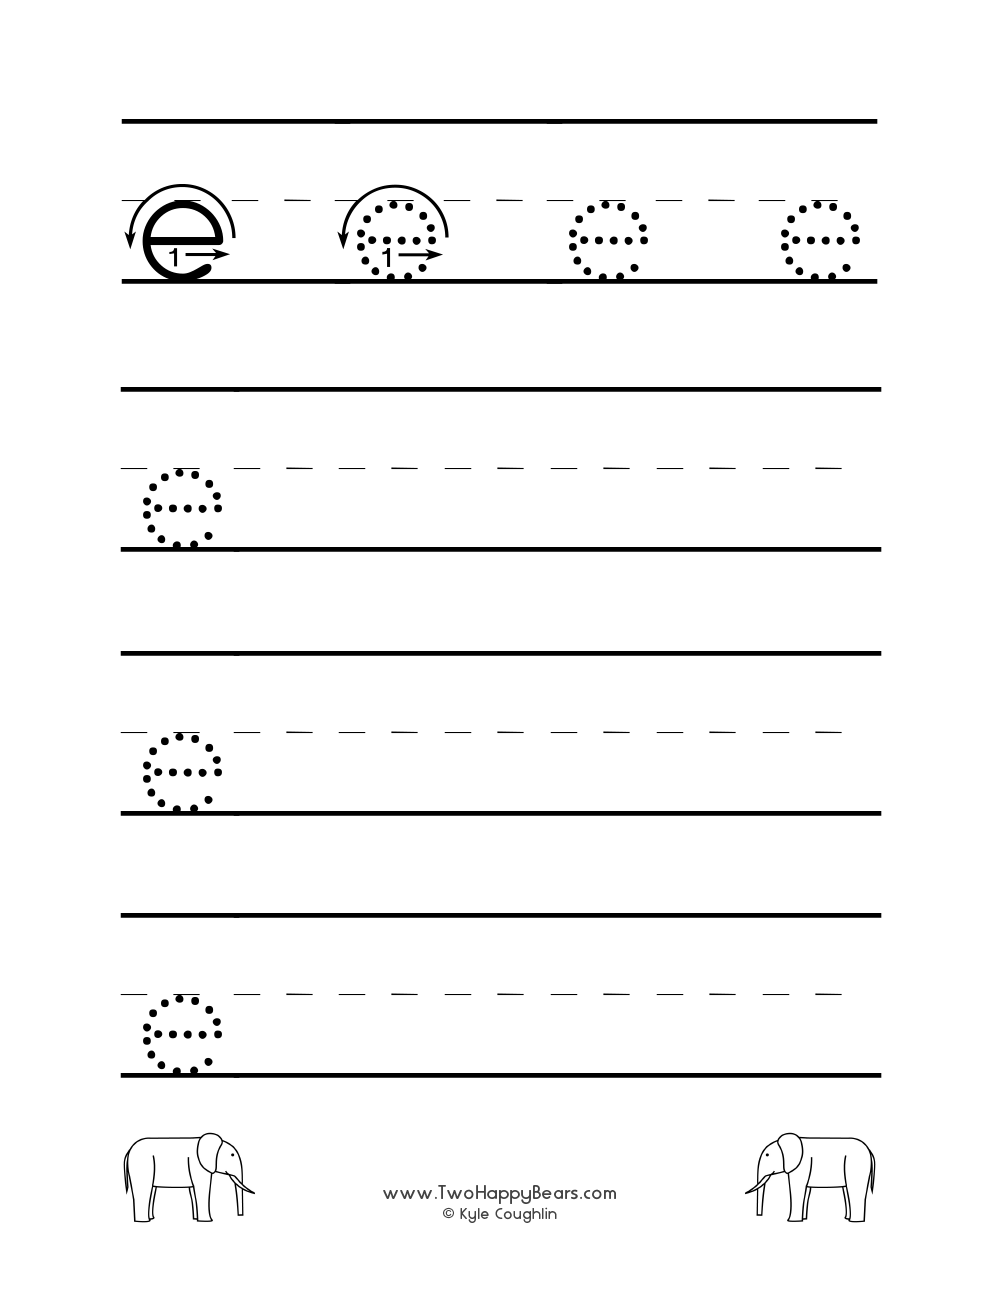 Lowercase letter E worksheet for tracing and drawing